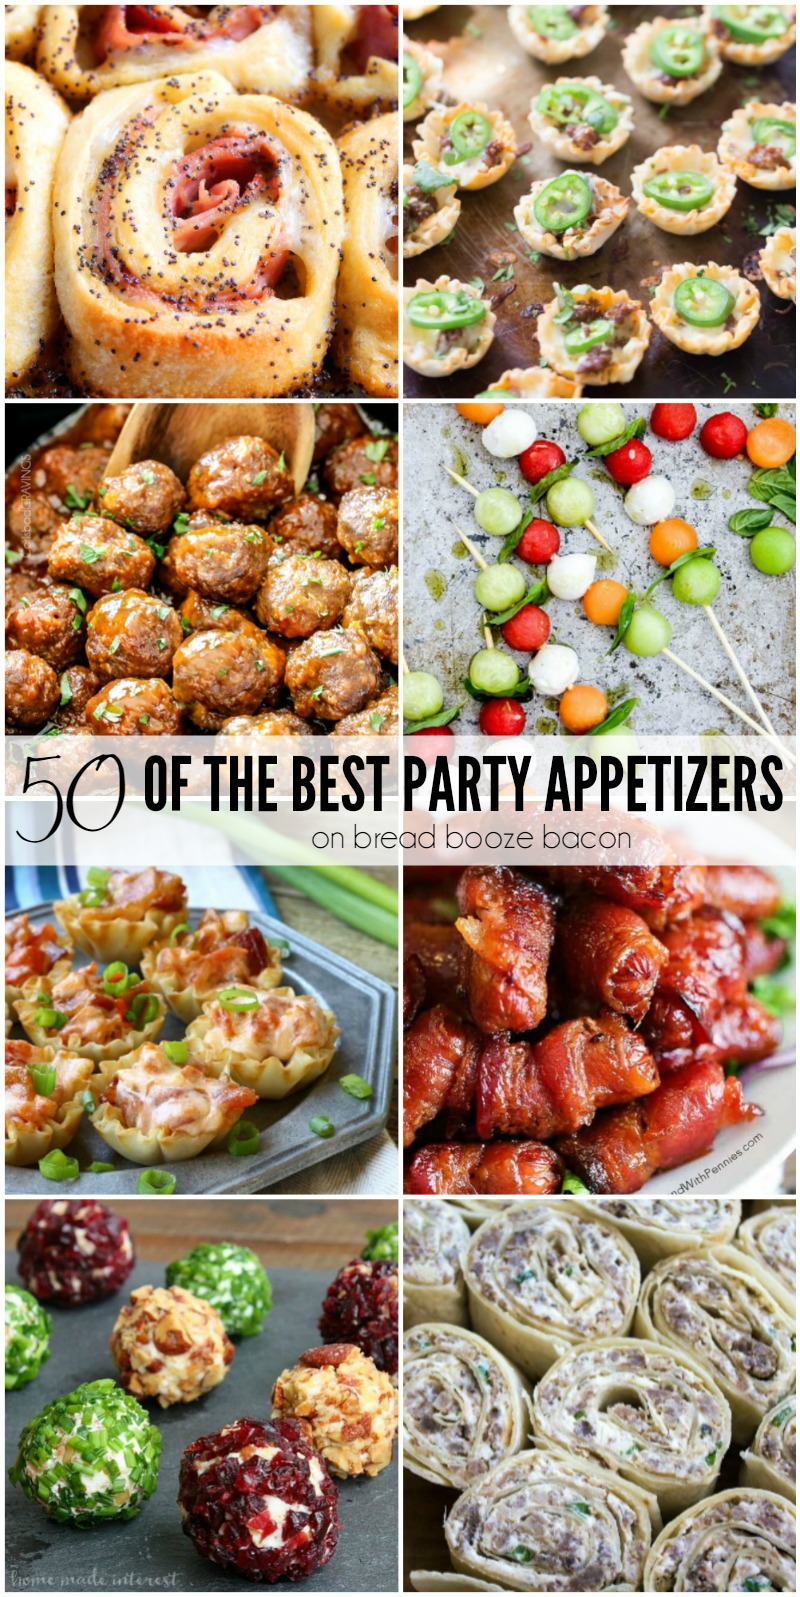 Get ready to get the party started with 50 of the Best Party Appetizers. All my favorites are here and they're all completely irresistible!